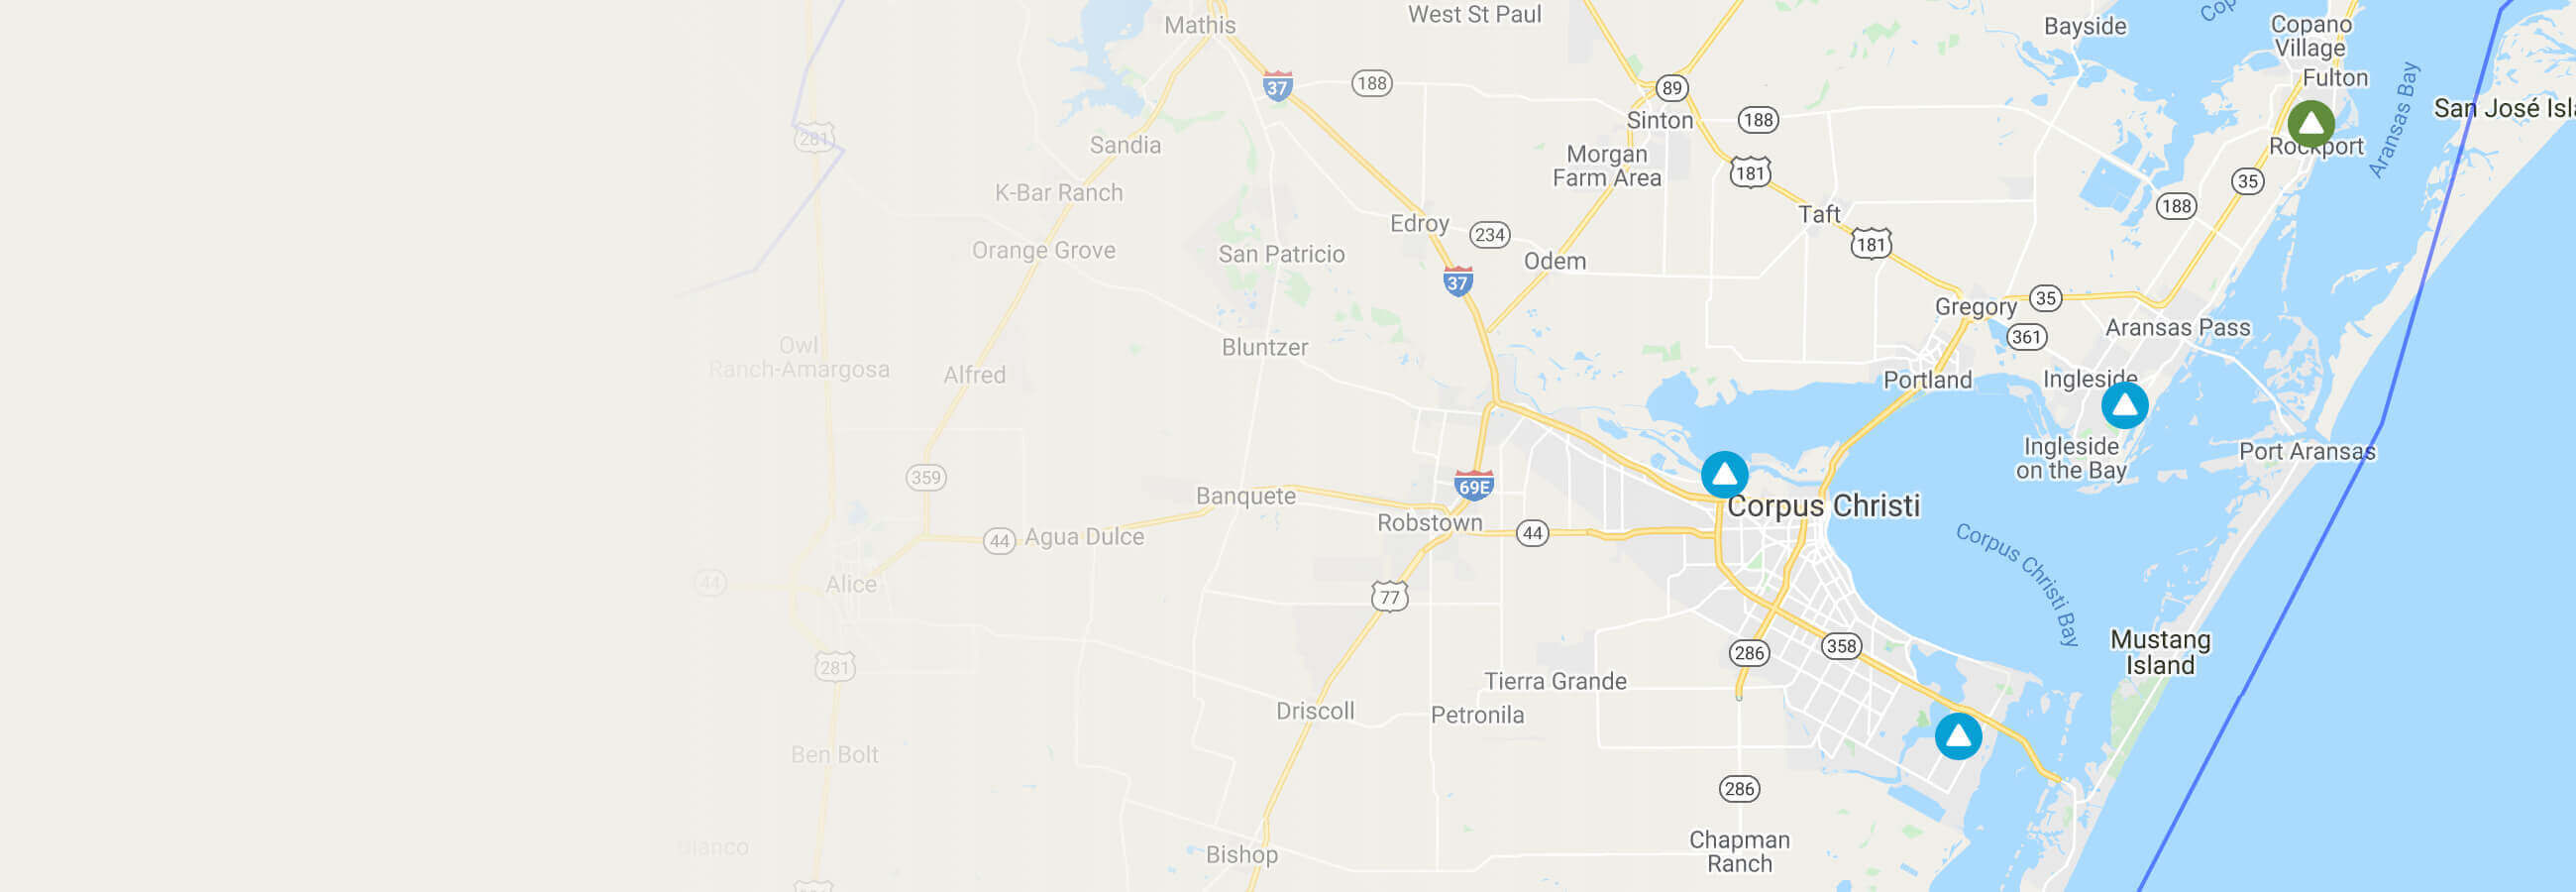 Oncor: multiple power outages in Central Texas